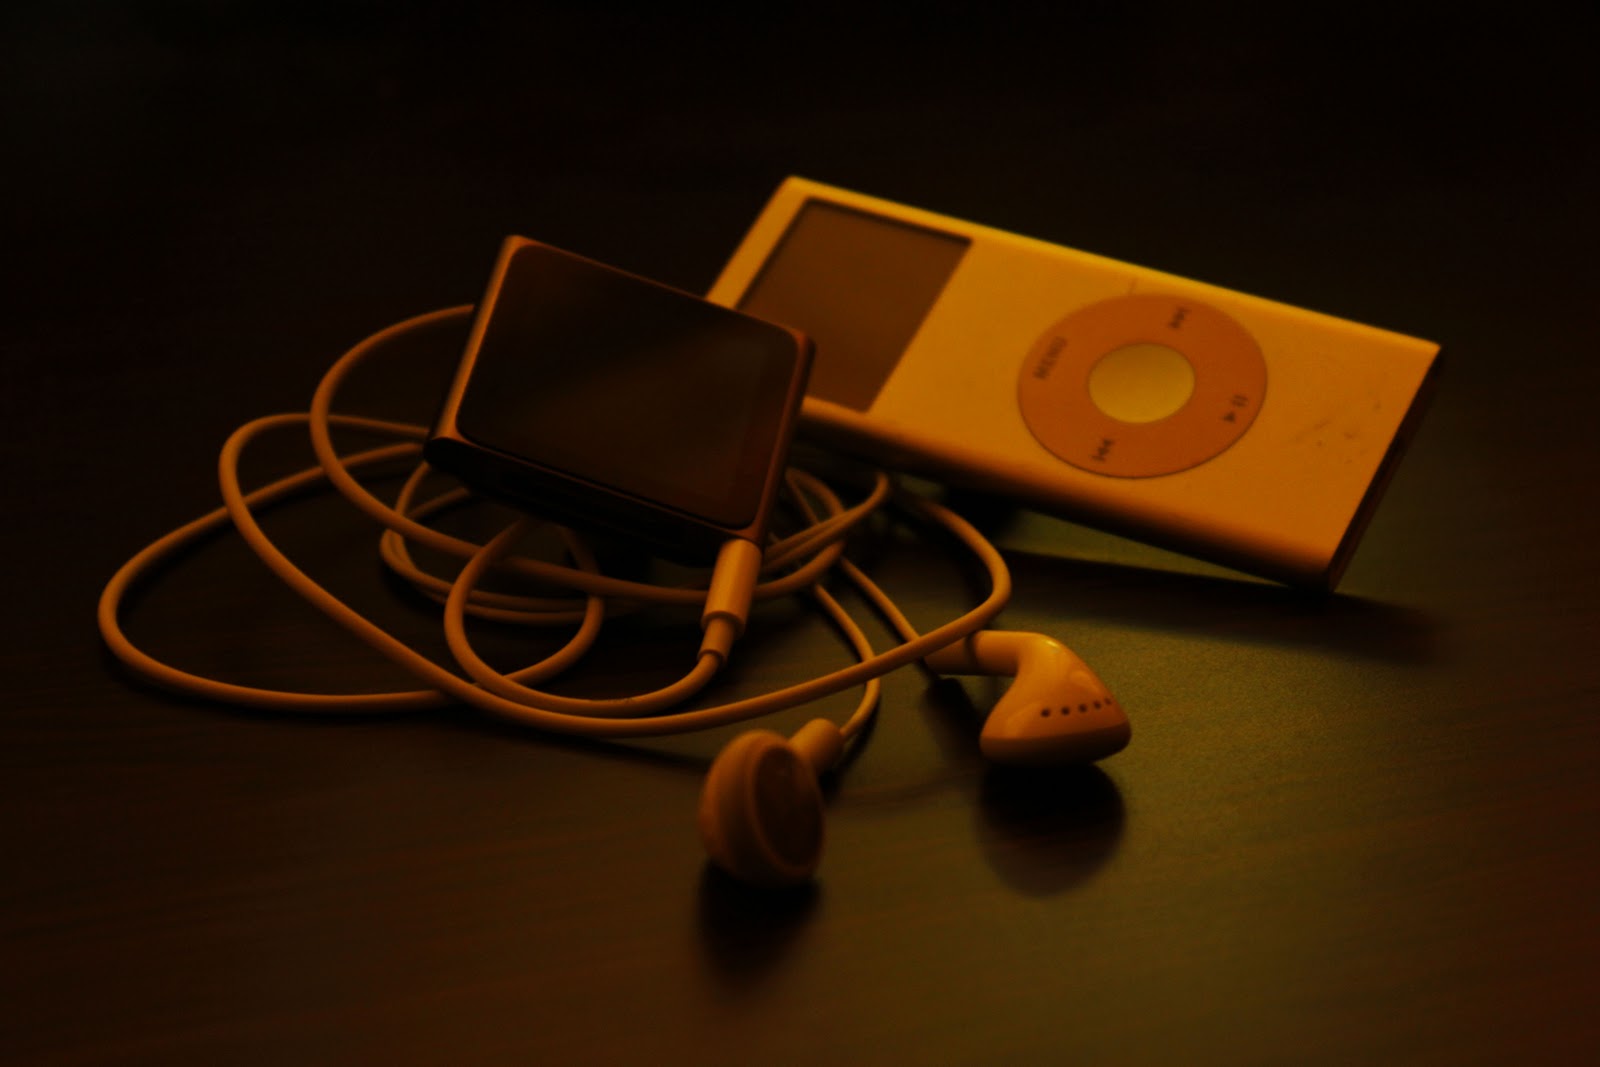 ... brother's iPod nano 6th Gen. (on the left) and my iPod nano 2nd Gen